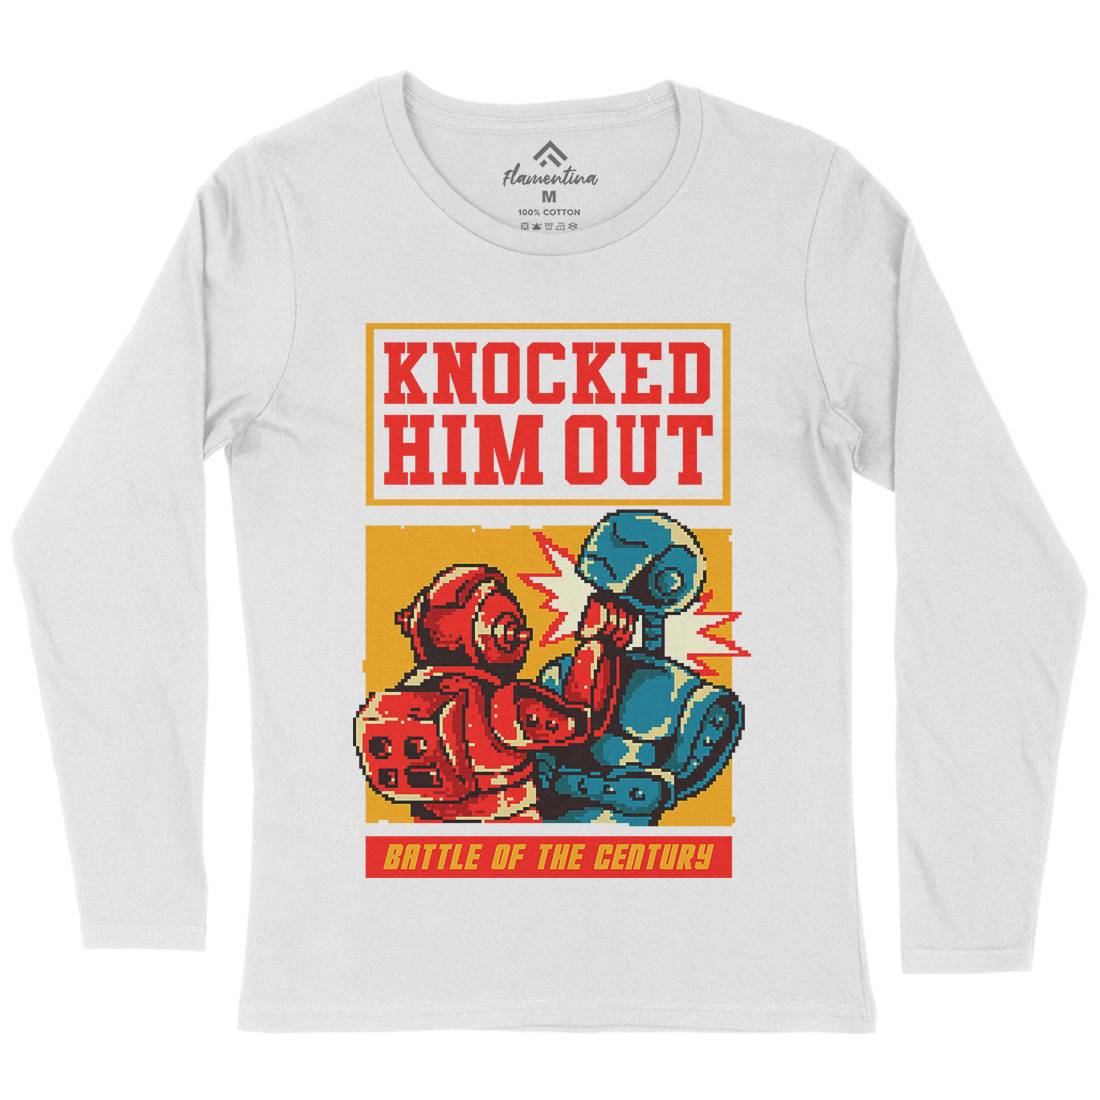 Knocked Him Out Womens Long Sleeve T-Shirt Space B923